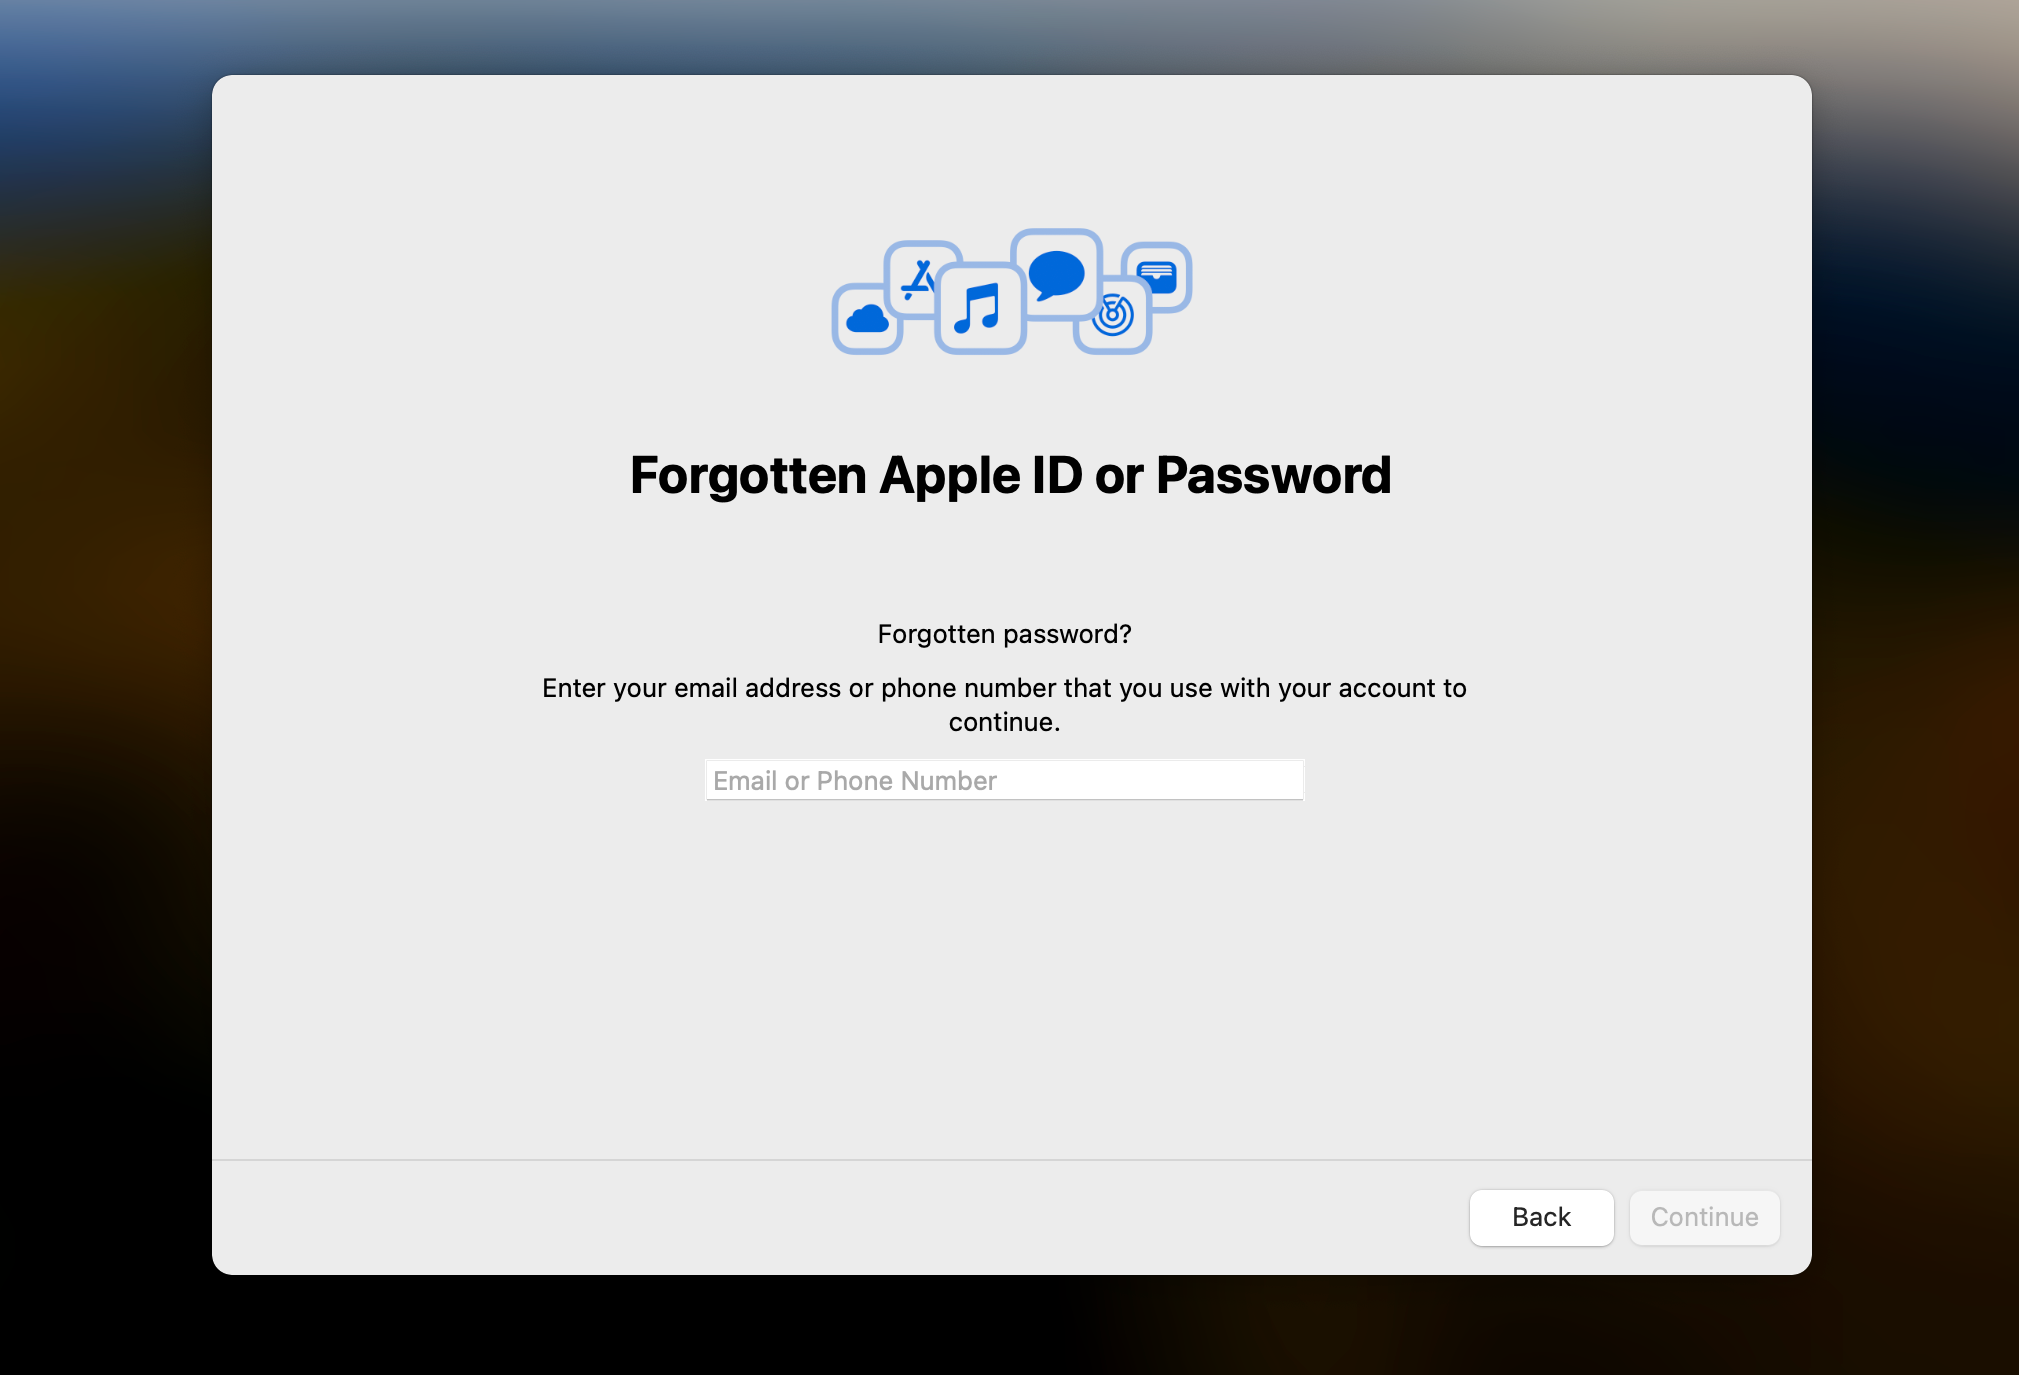 Forgotten Apple ID or Password page on Mac